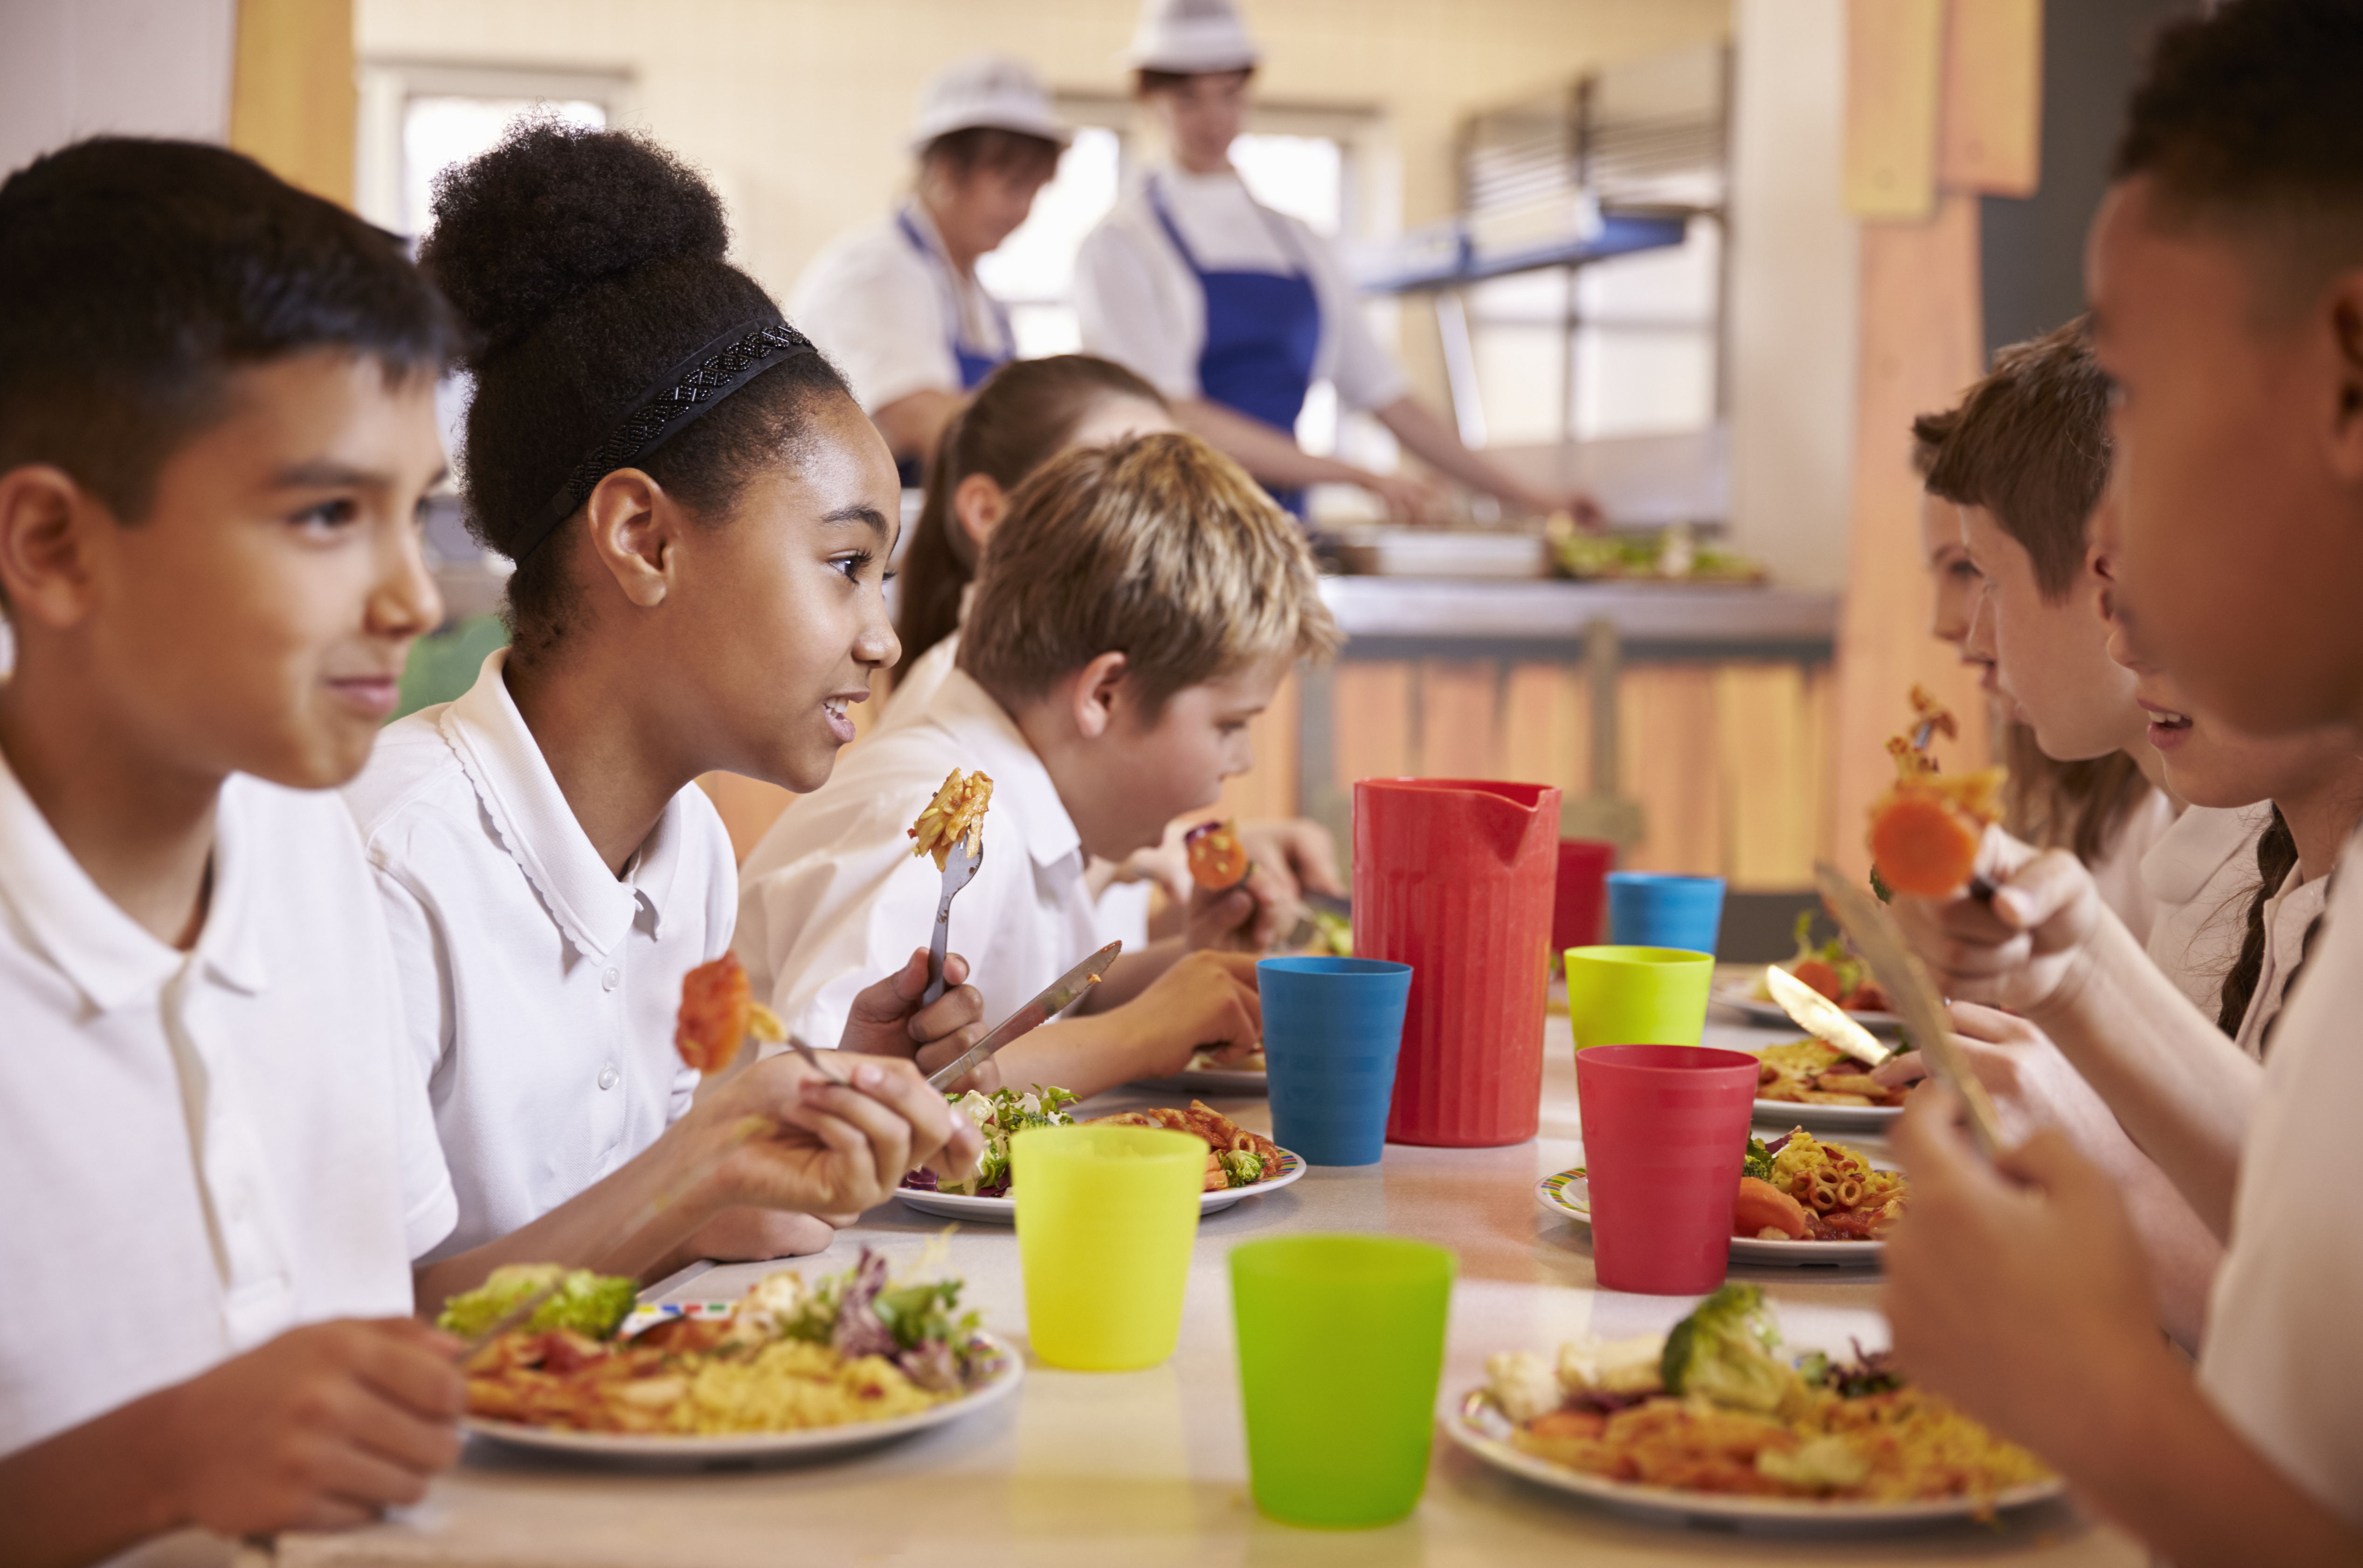 Implementing strong school nutrition policies is associated with healthier weight trajectories in middle school students, according to a new study by researchers at UConn and Yale. (Shutterstock Photo)